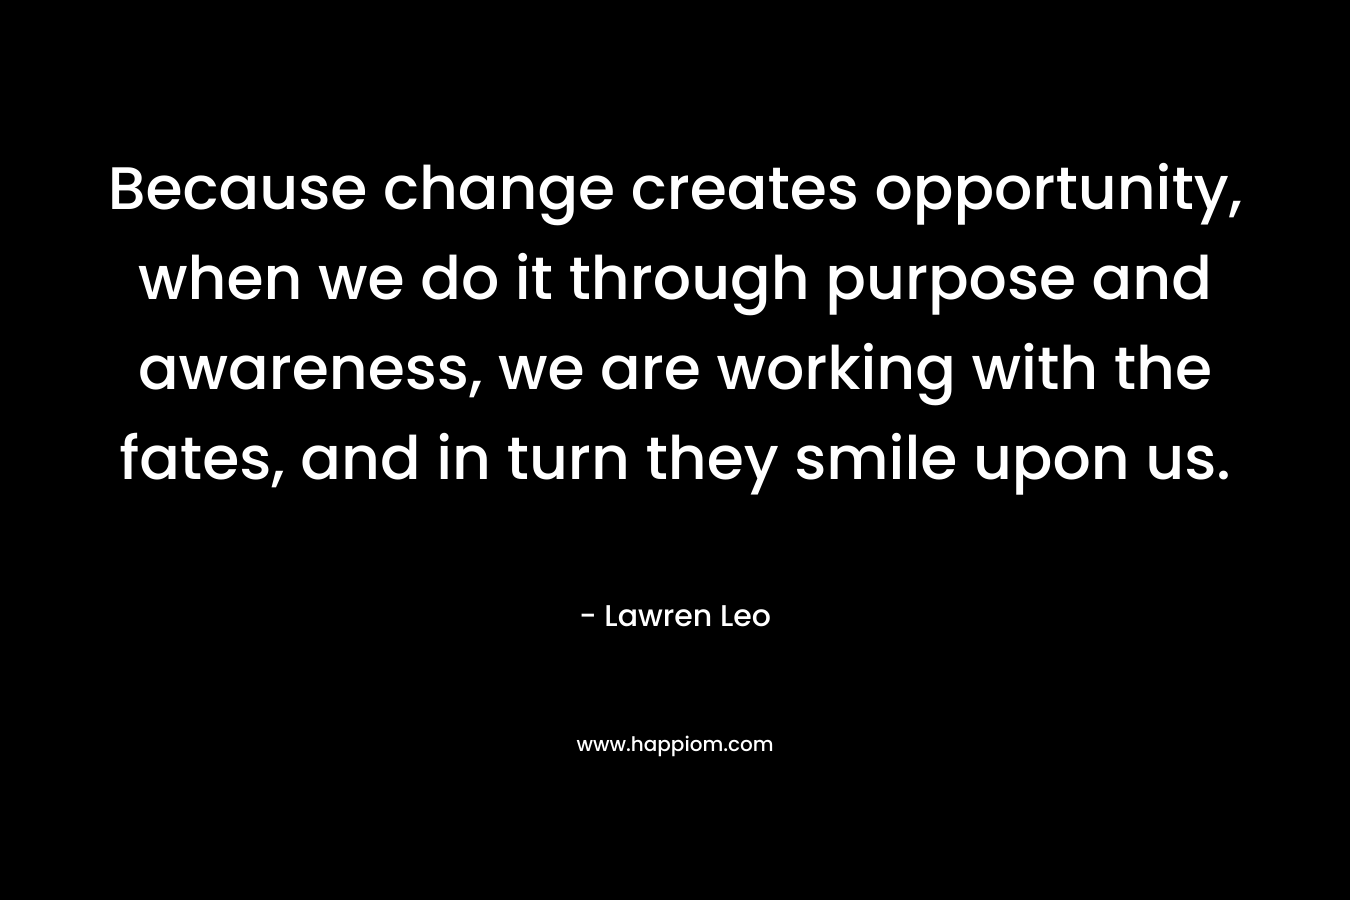 Because change creates opportunity, when we do it through purpose and awareness, we are working with the fates, and in turn they smile upon us.